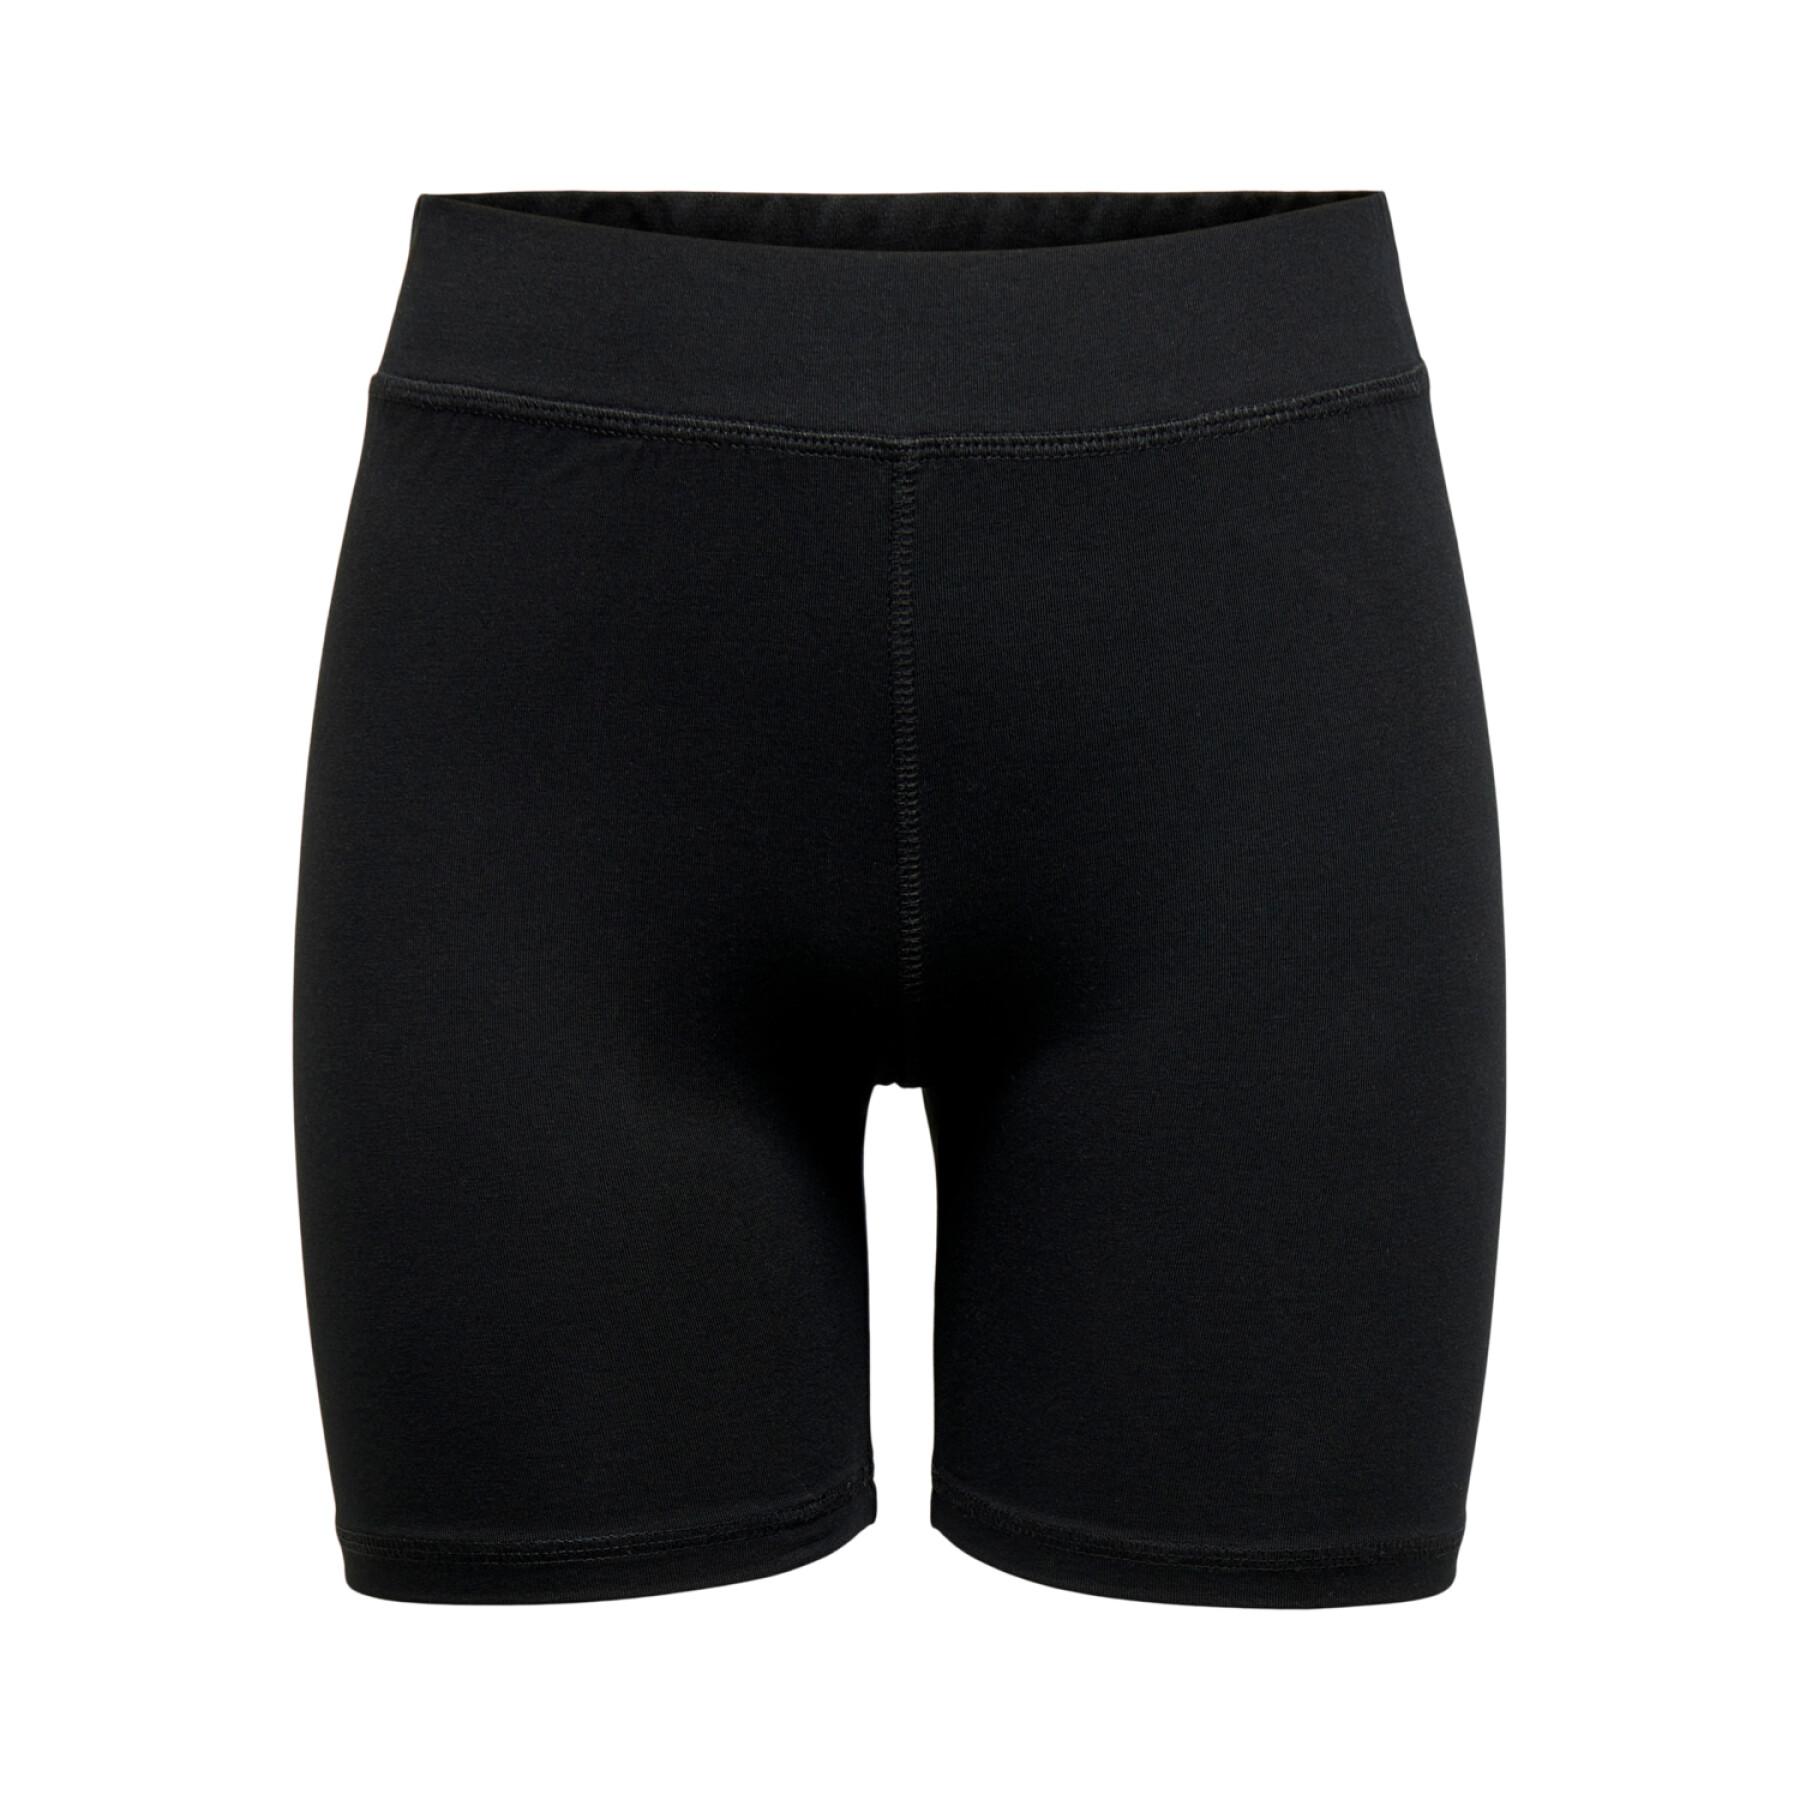 Women's shorts Only play onpnoon